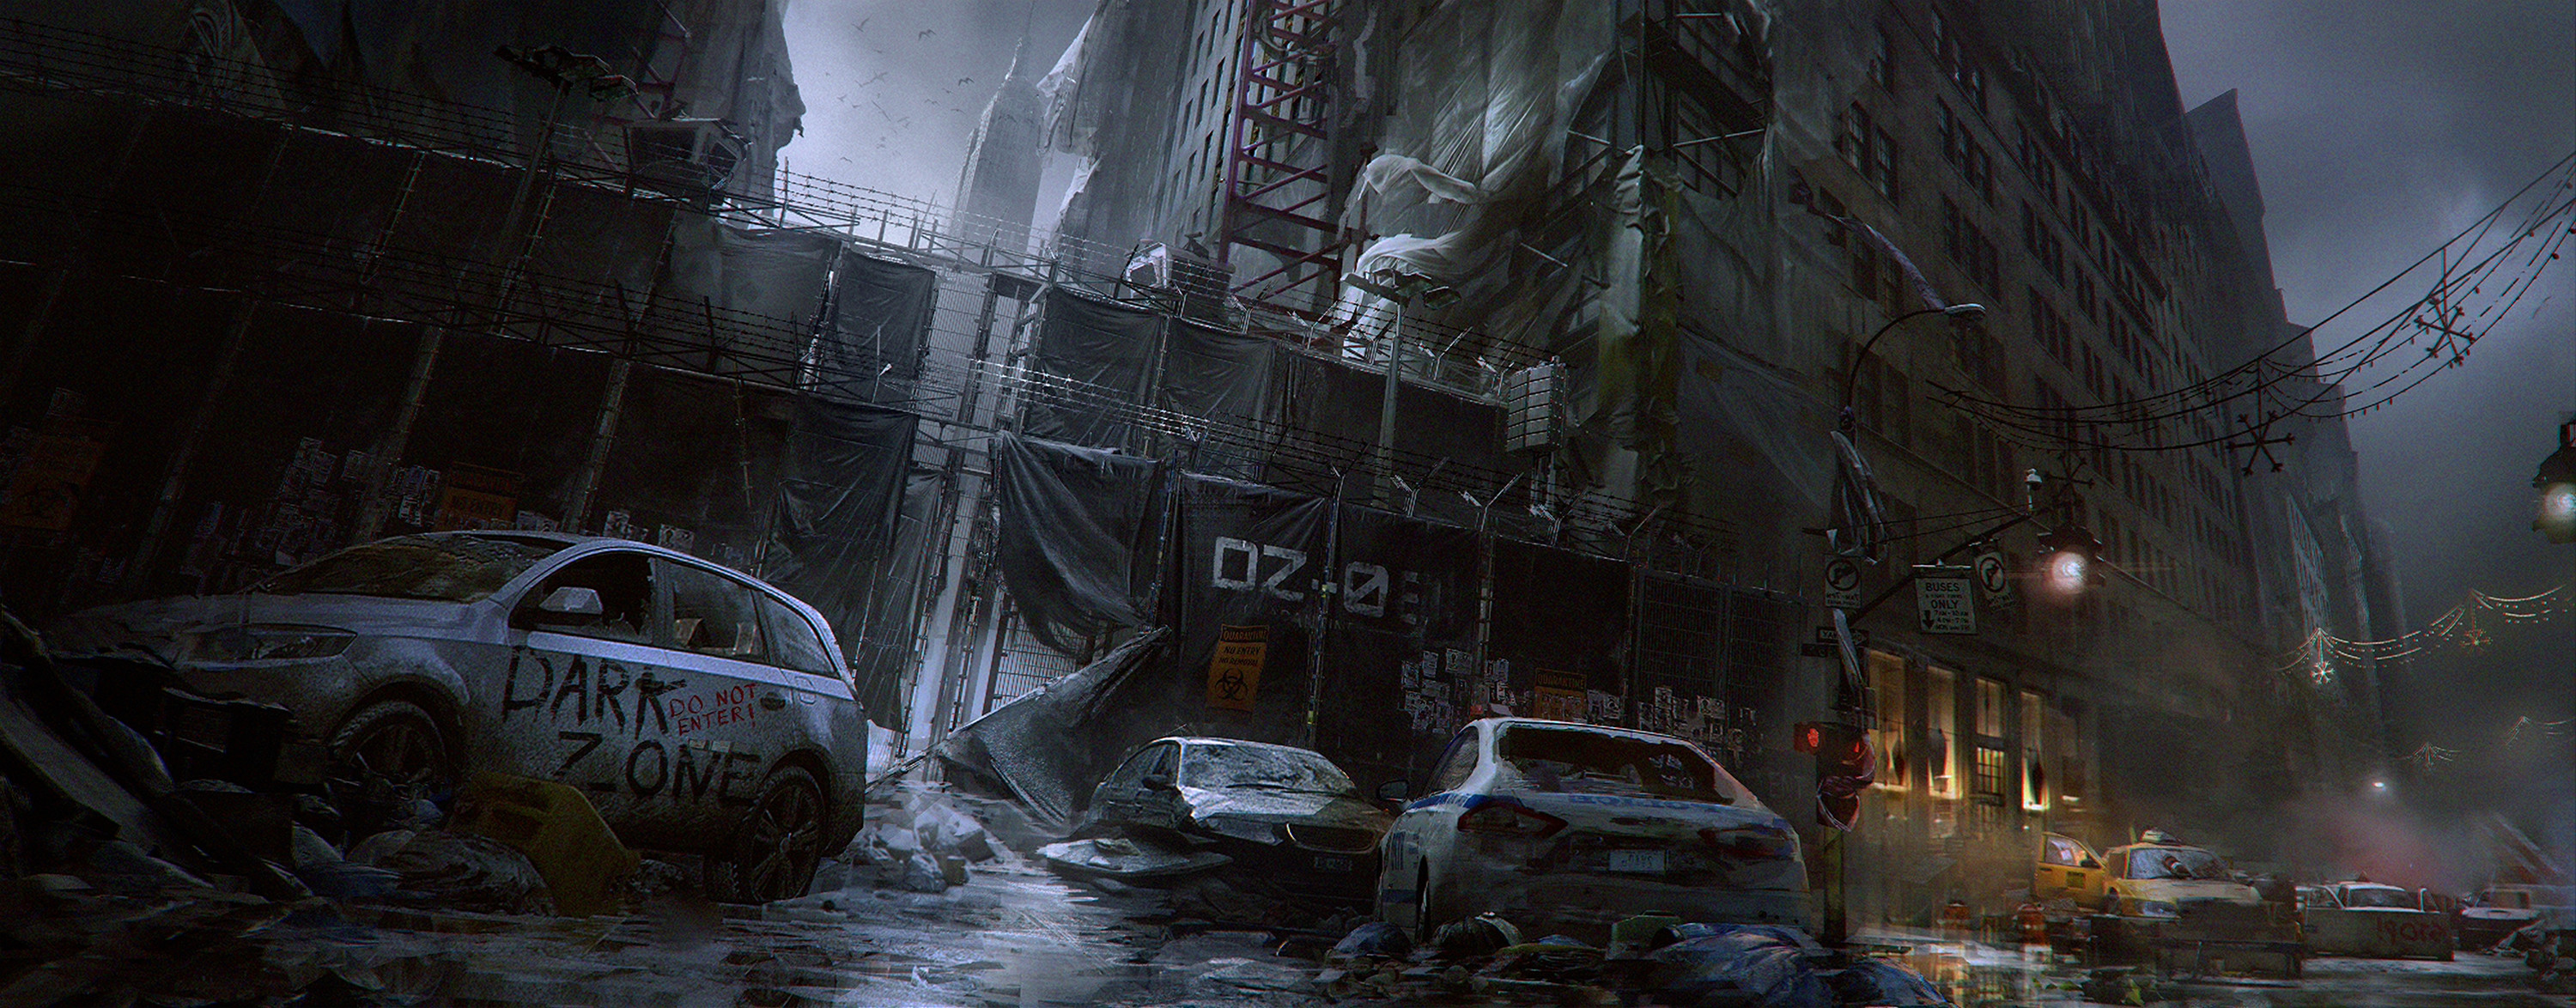 3000x1174 Video Game - Tom Clancy's The Division Concept Art Apocalypse Video Game  Tom Clancy Wallpaper